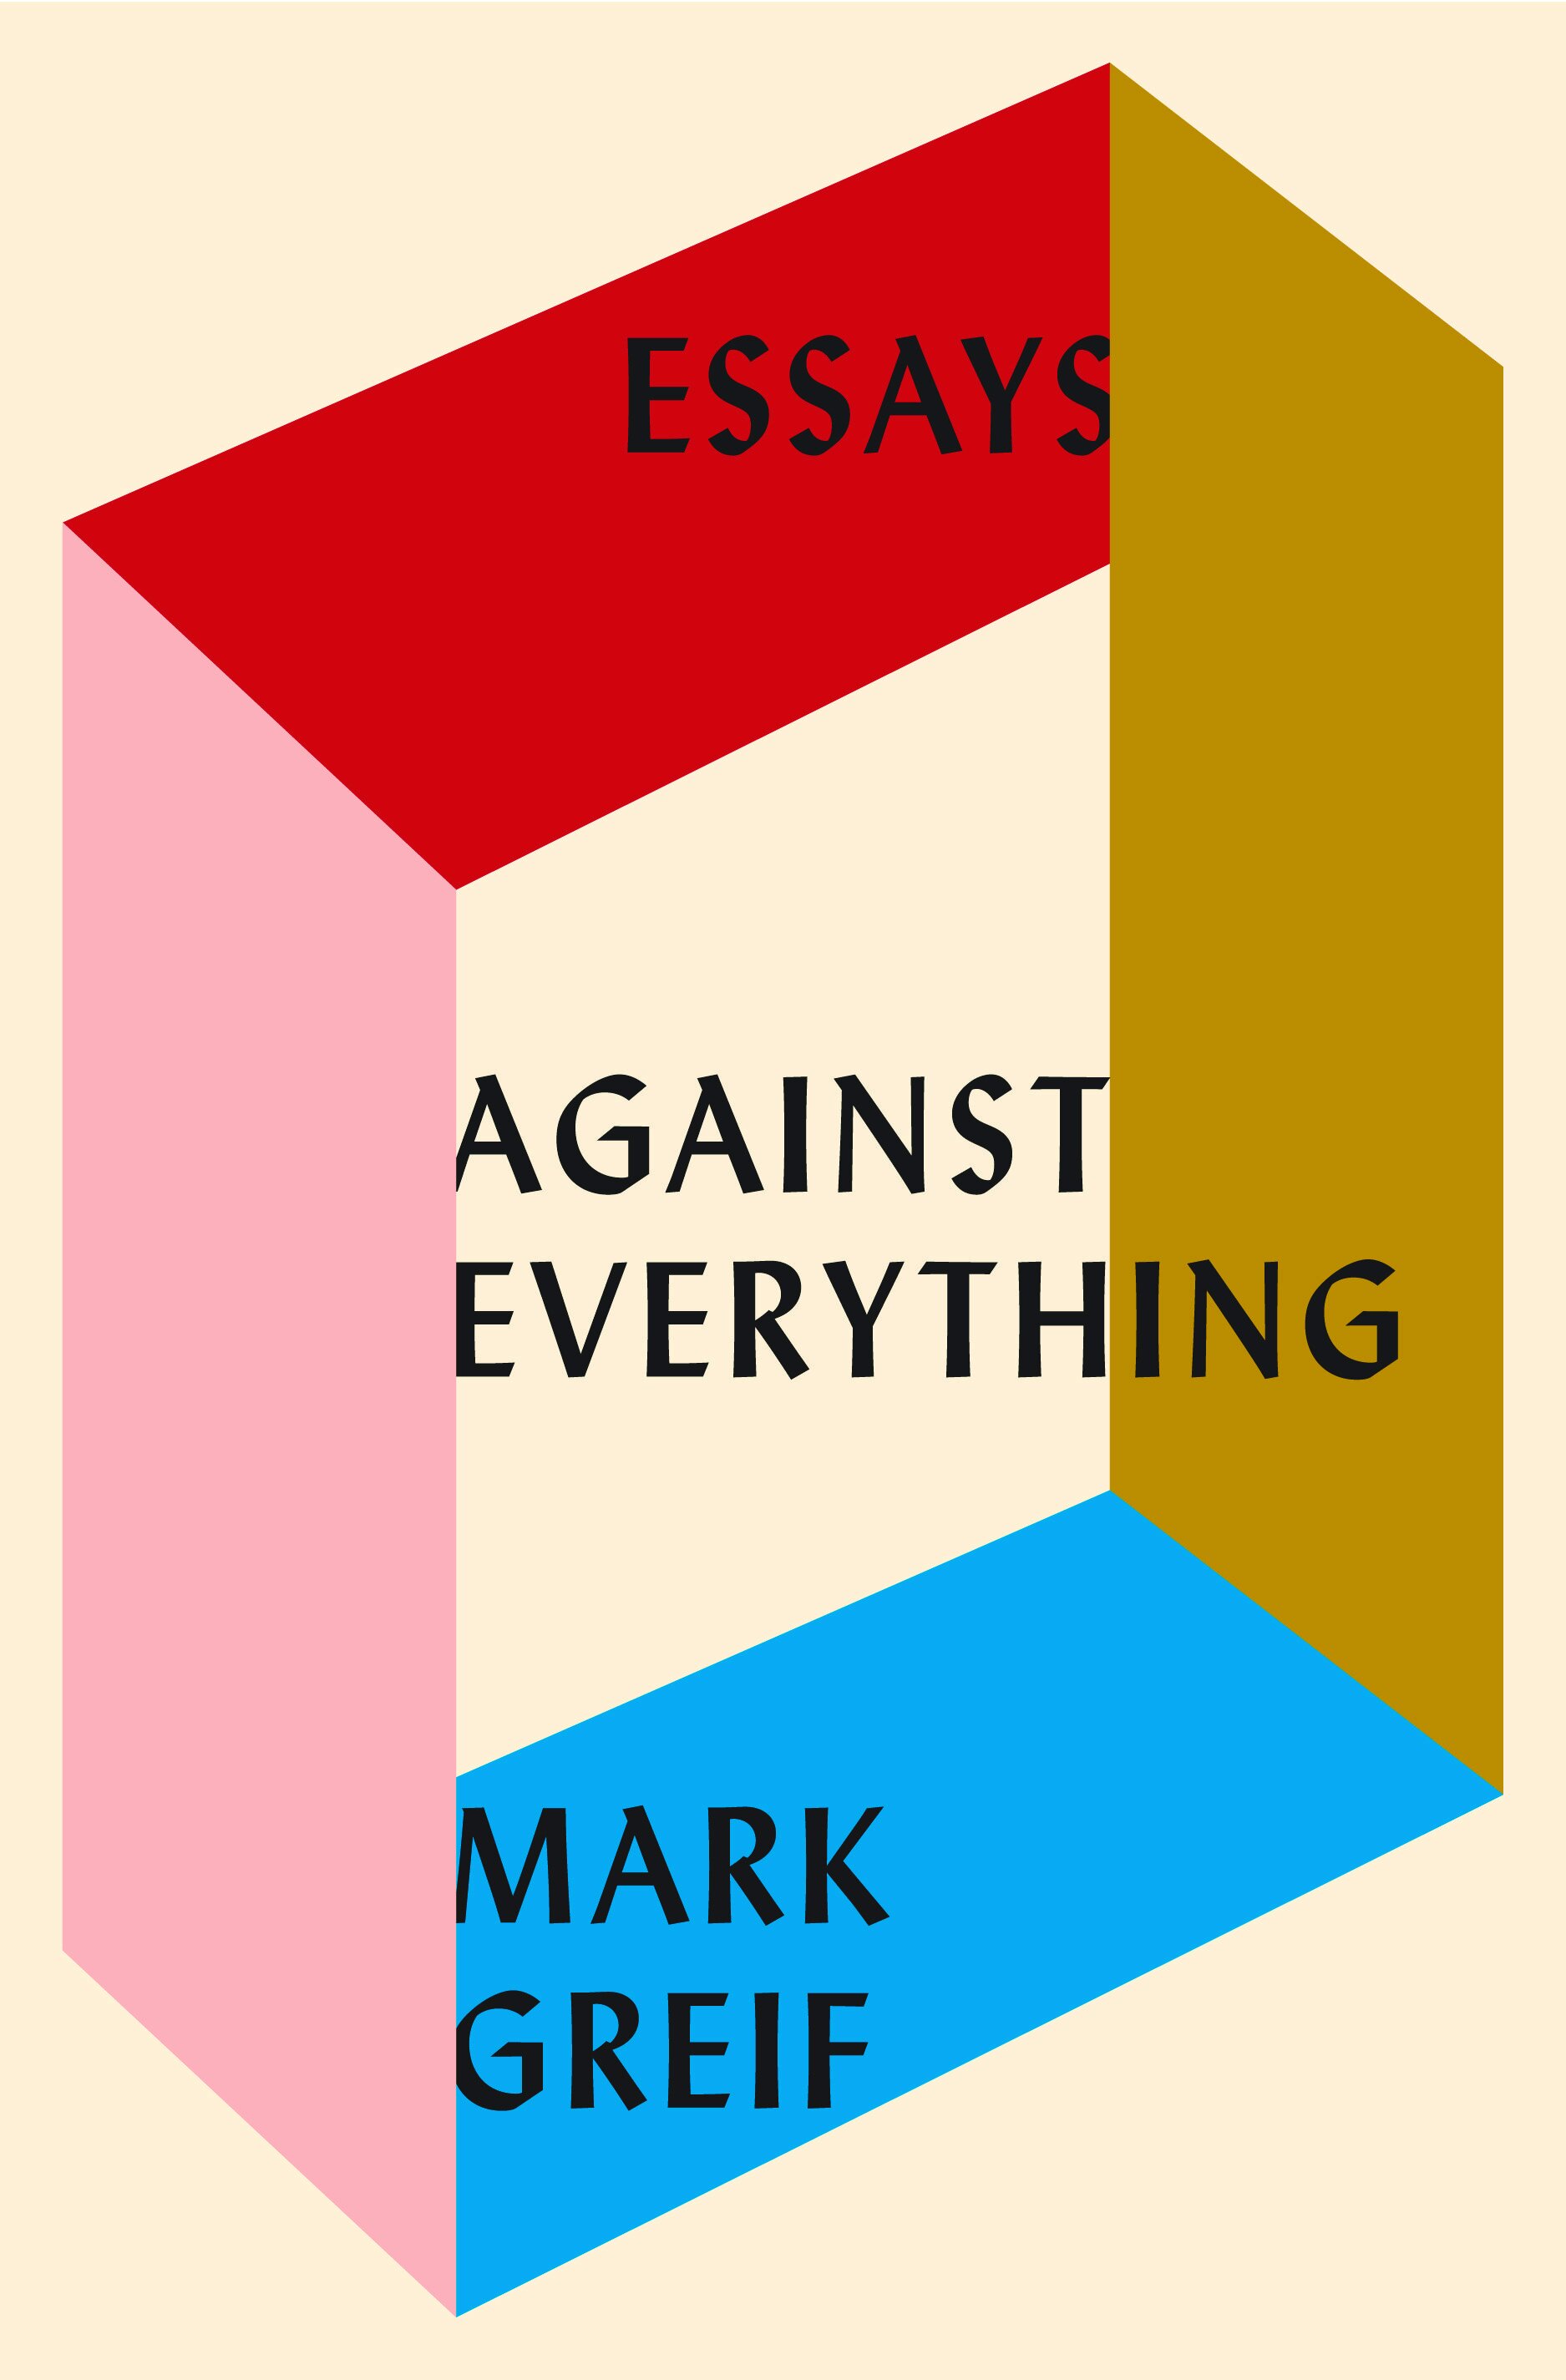 passerbuys+guide+essay+collections+mark+greif+against+everything